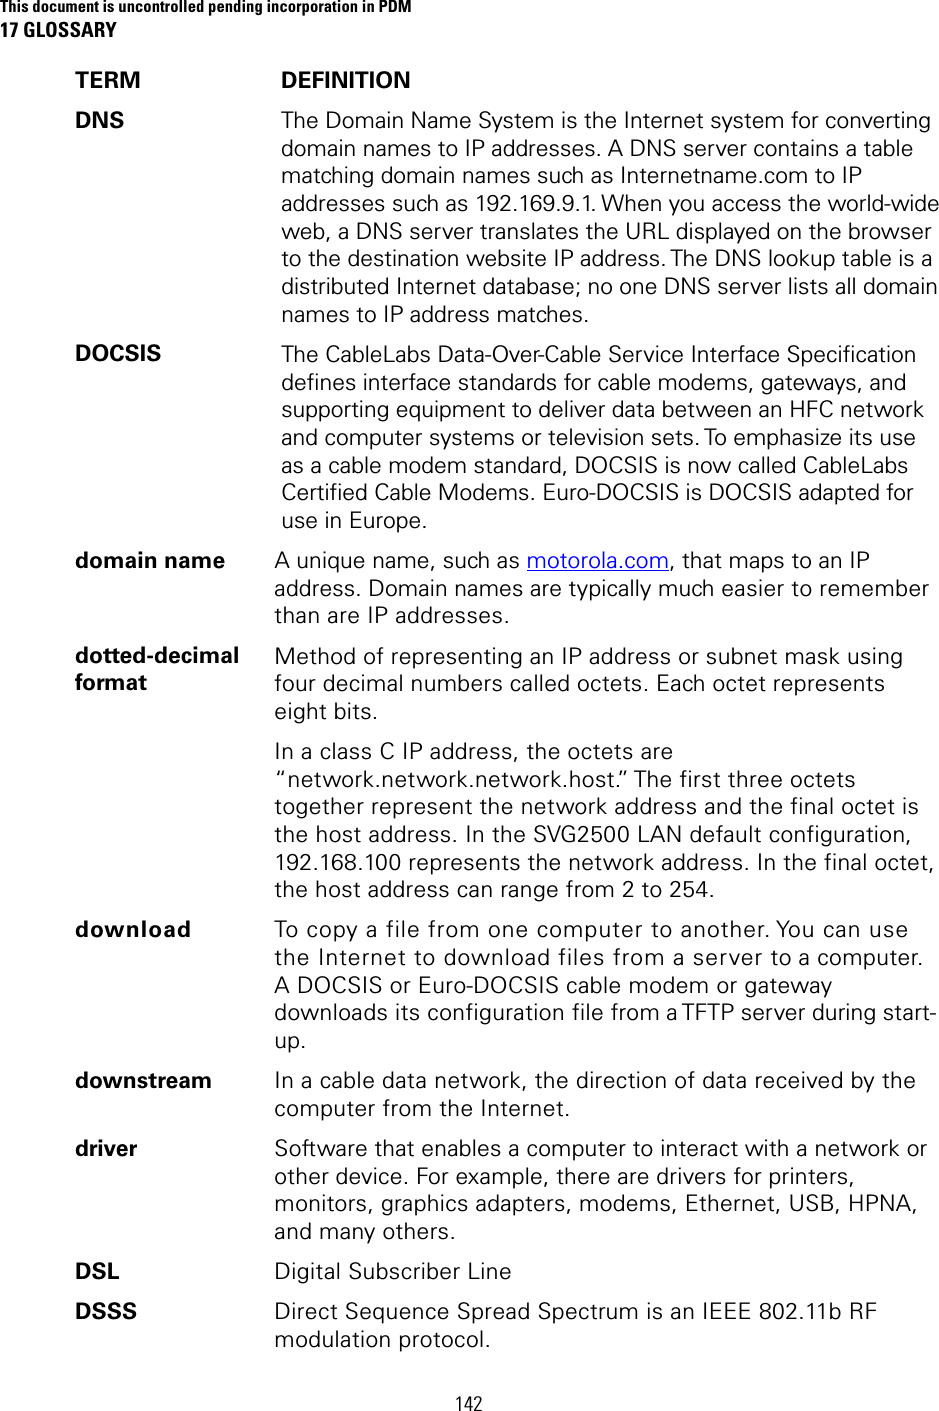 This document is uncontrolled pending incorporation in PDM 17 GLOSSARY 142 TERM DEFINITION DNS  The Domain Name System is the Internet system for converting domain names to IP addresses. A DNS server contains a table matching domain names such as Internetname.com to IP addresses such as 192.169.9.1. When you access the world-wide web, a DNS server translates the URL displayed on the browser to the destination website IP address. The DNS lookup table is a distributed Internet database; no one DNS server lists all domain names to IP address matches. DOCSIS  The CableLabs Data-Over-Cable Service Interface Specification defines interface standards for cable modems, gateways, and supporting equipment to deliver data between an HFC network and computer systems or television sets. To emphasize its use as a cable modem standard, DOCSIS is now called CableLabs Certified Cable Modems. Euro-DOCSIS is DOCSIS adapted for use in Europe. domain name  A unique name, such as motorola.com, that maps to an IP address. Domain names are typically much easier to remember than are IP addresses. dotted-decimal format Method of representing an IP address or subnet mask using four decimal numbers called octets. Each octet represents eight bits. In a class C IP address, the octets are “network.network.network.host.” The first three octets together represent the network address and the final octet is the host address. In the SVG2500 LAN default configuration, 192.168.100 represents the network address. In the final octet, the host address can range from 2 to 254. download  To copy a file from one computer to another. You can use the Internet to download files from a server to a computer. A DOCSIS or Euro-DOCSIS cable modem or gateway downloads its configuration file from a TFTP server during start-up. downstream  In a cable data network, the direction of data received by the computer from the Internet. driver  Software that enables a computer to interact with a network or other device. For example, there are drivers for printers, monitors, graphics adapters, modems, Ethernet, USB, HPNA, and many others. DSL  Digital Subscriber Line DSSS  Direct Sequence Spread Spectrum is an IEEE 802.11b RF modulation protocol. 